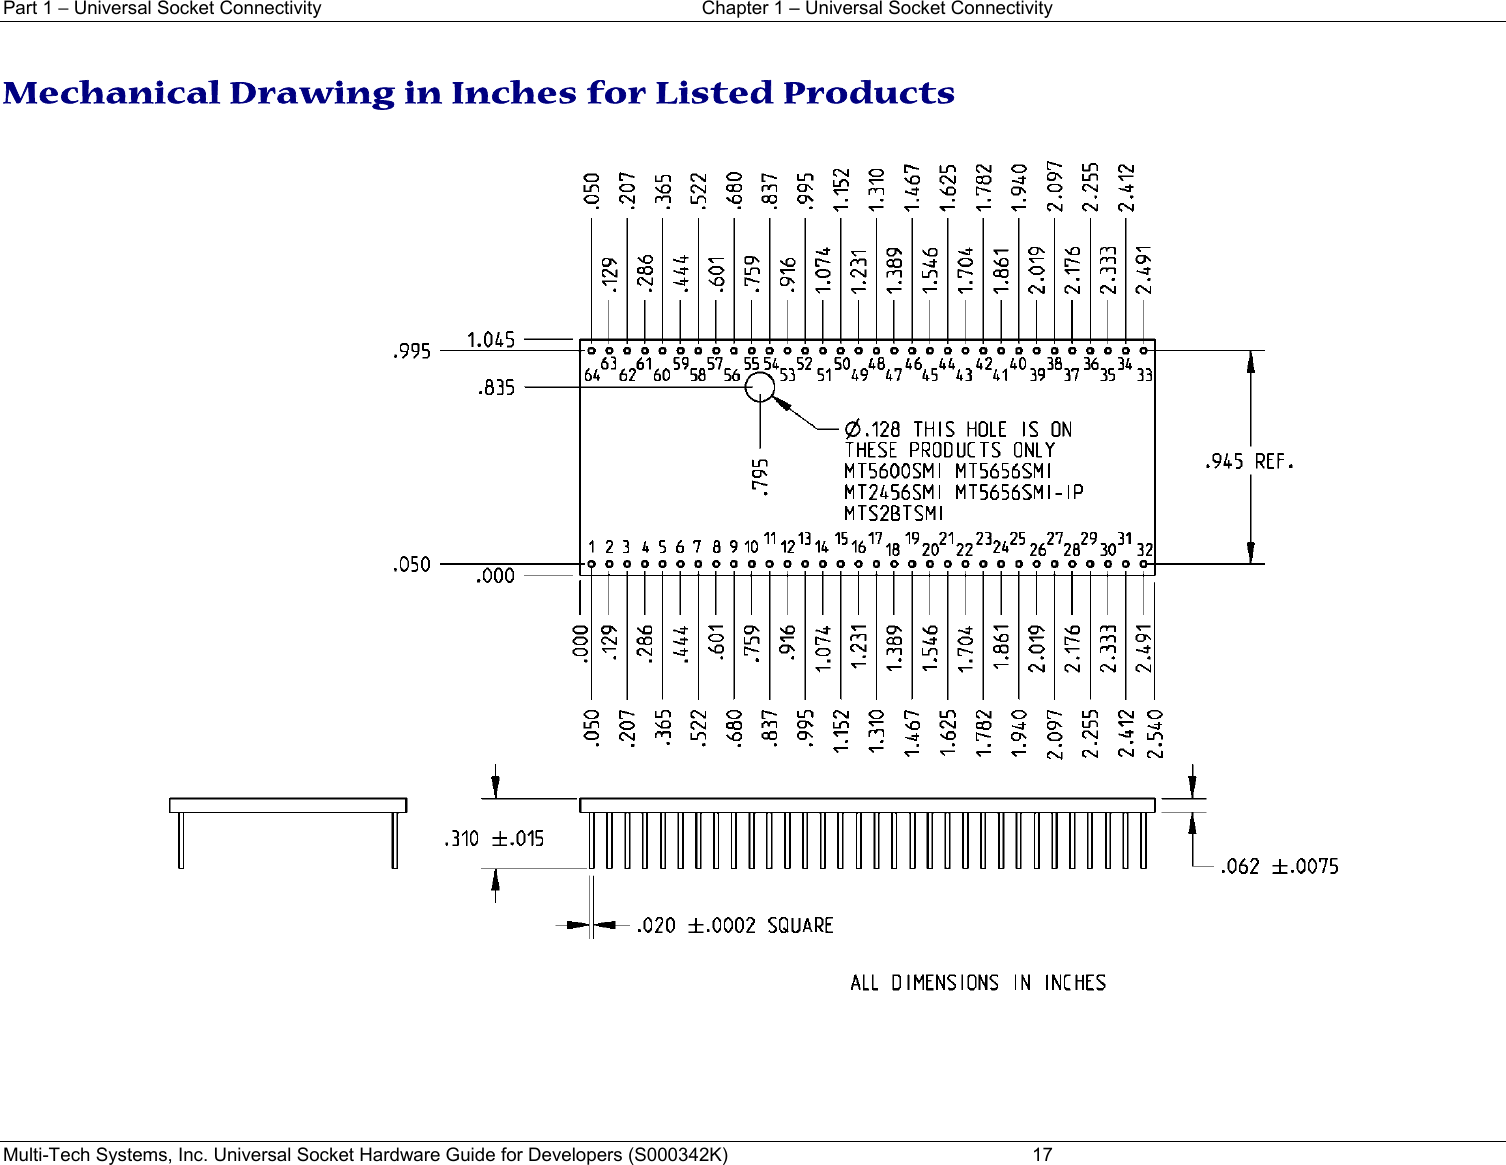 Part 1 − Universal Socket Connectivity    Chapter 1 – Universal Socket Connectivity Multi-Tech Systems, Inc. Universal Socket Hardware Guide for Developers (S000342K)  17  Mechanical Drawing in Inches for Listed Products  